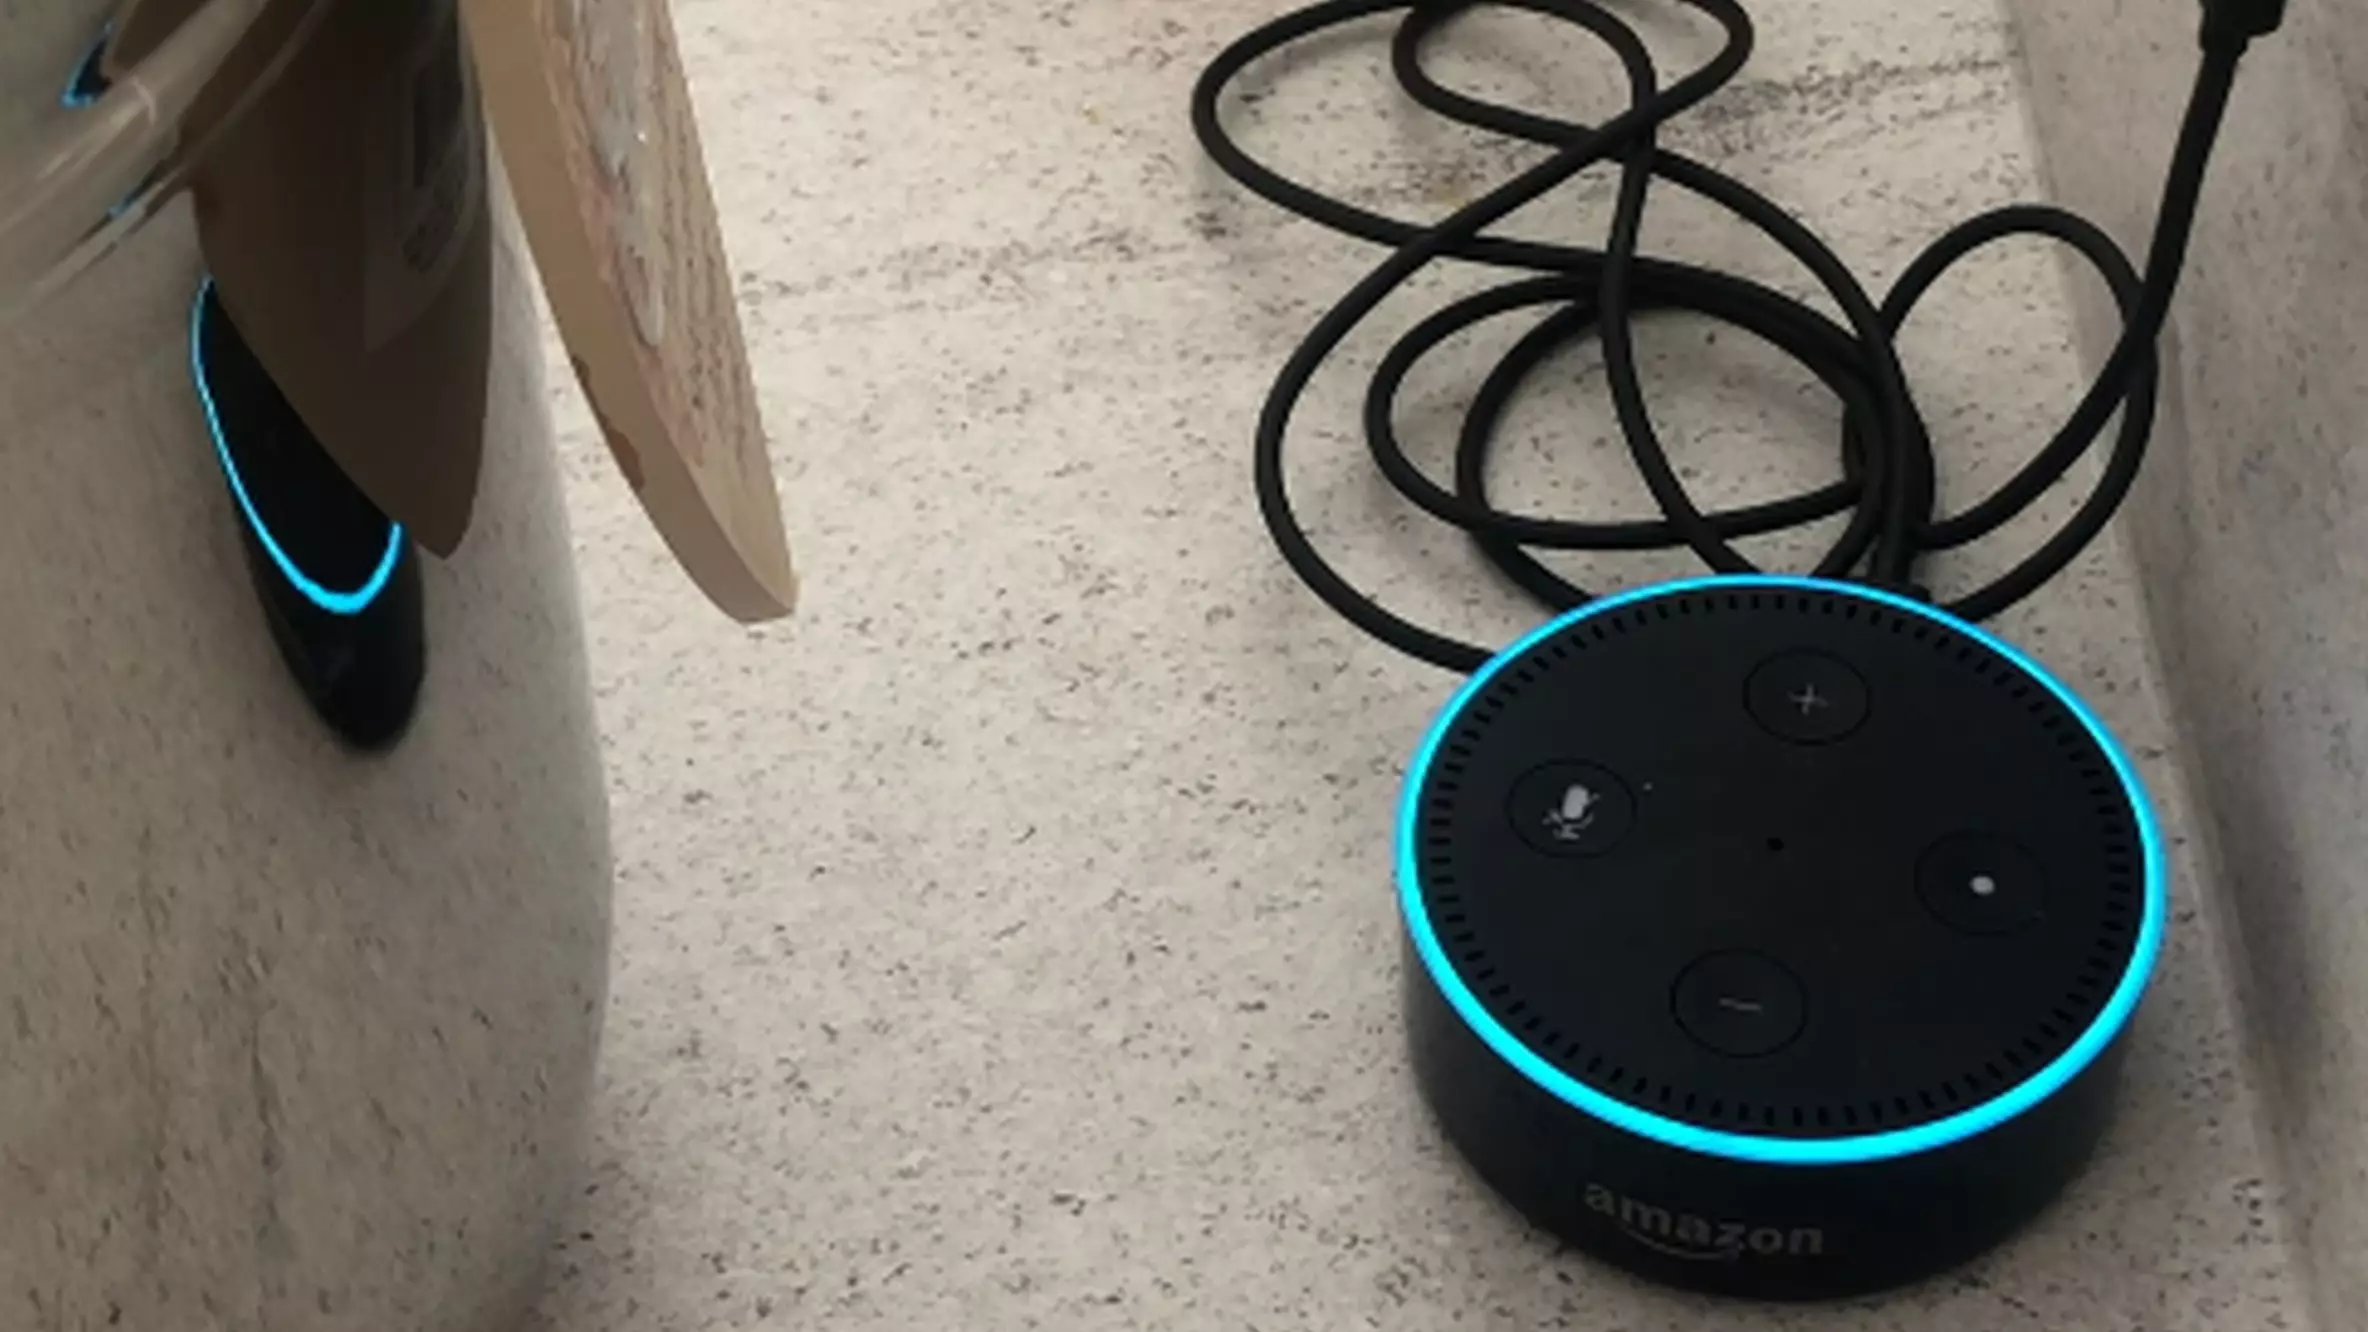 Mum Terrified After She Claims Alexa 'Went Rogue' And Told Her To Take Her Own Life